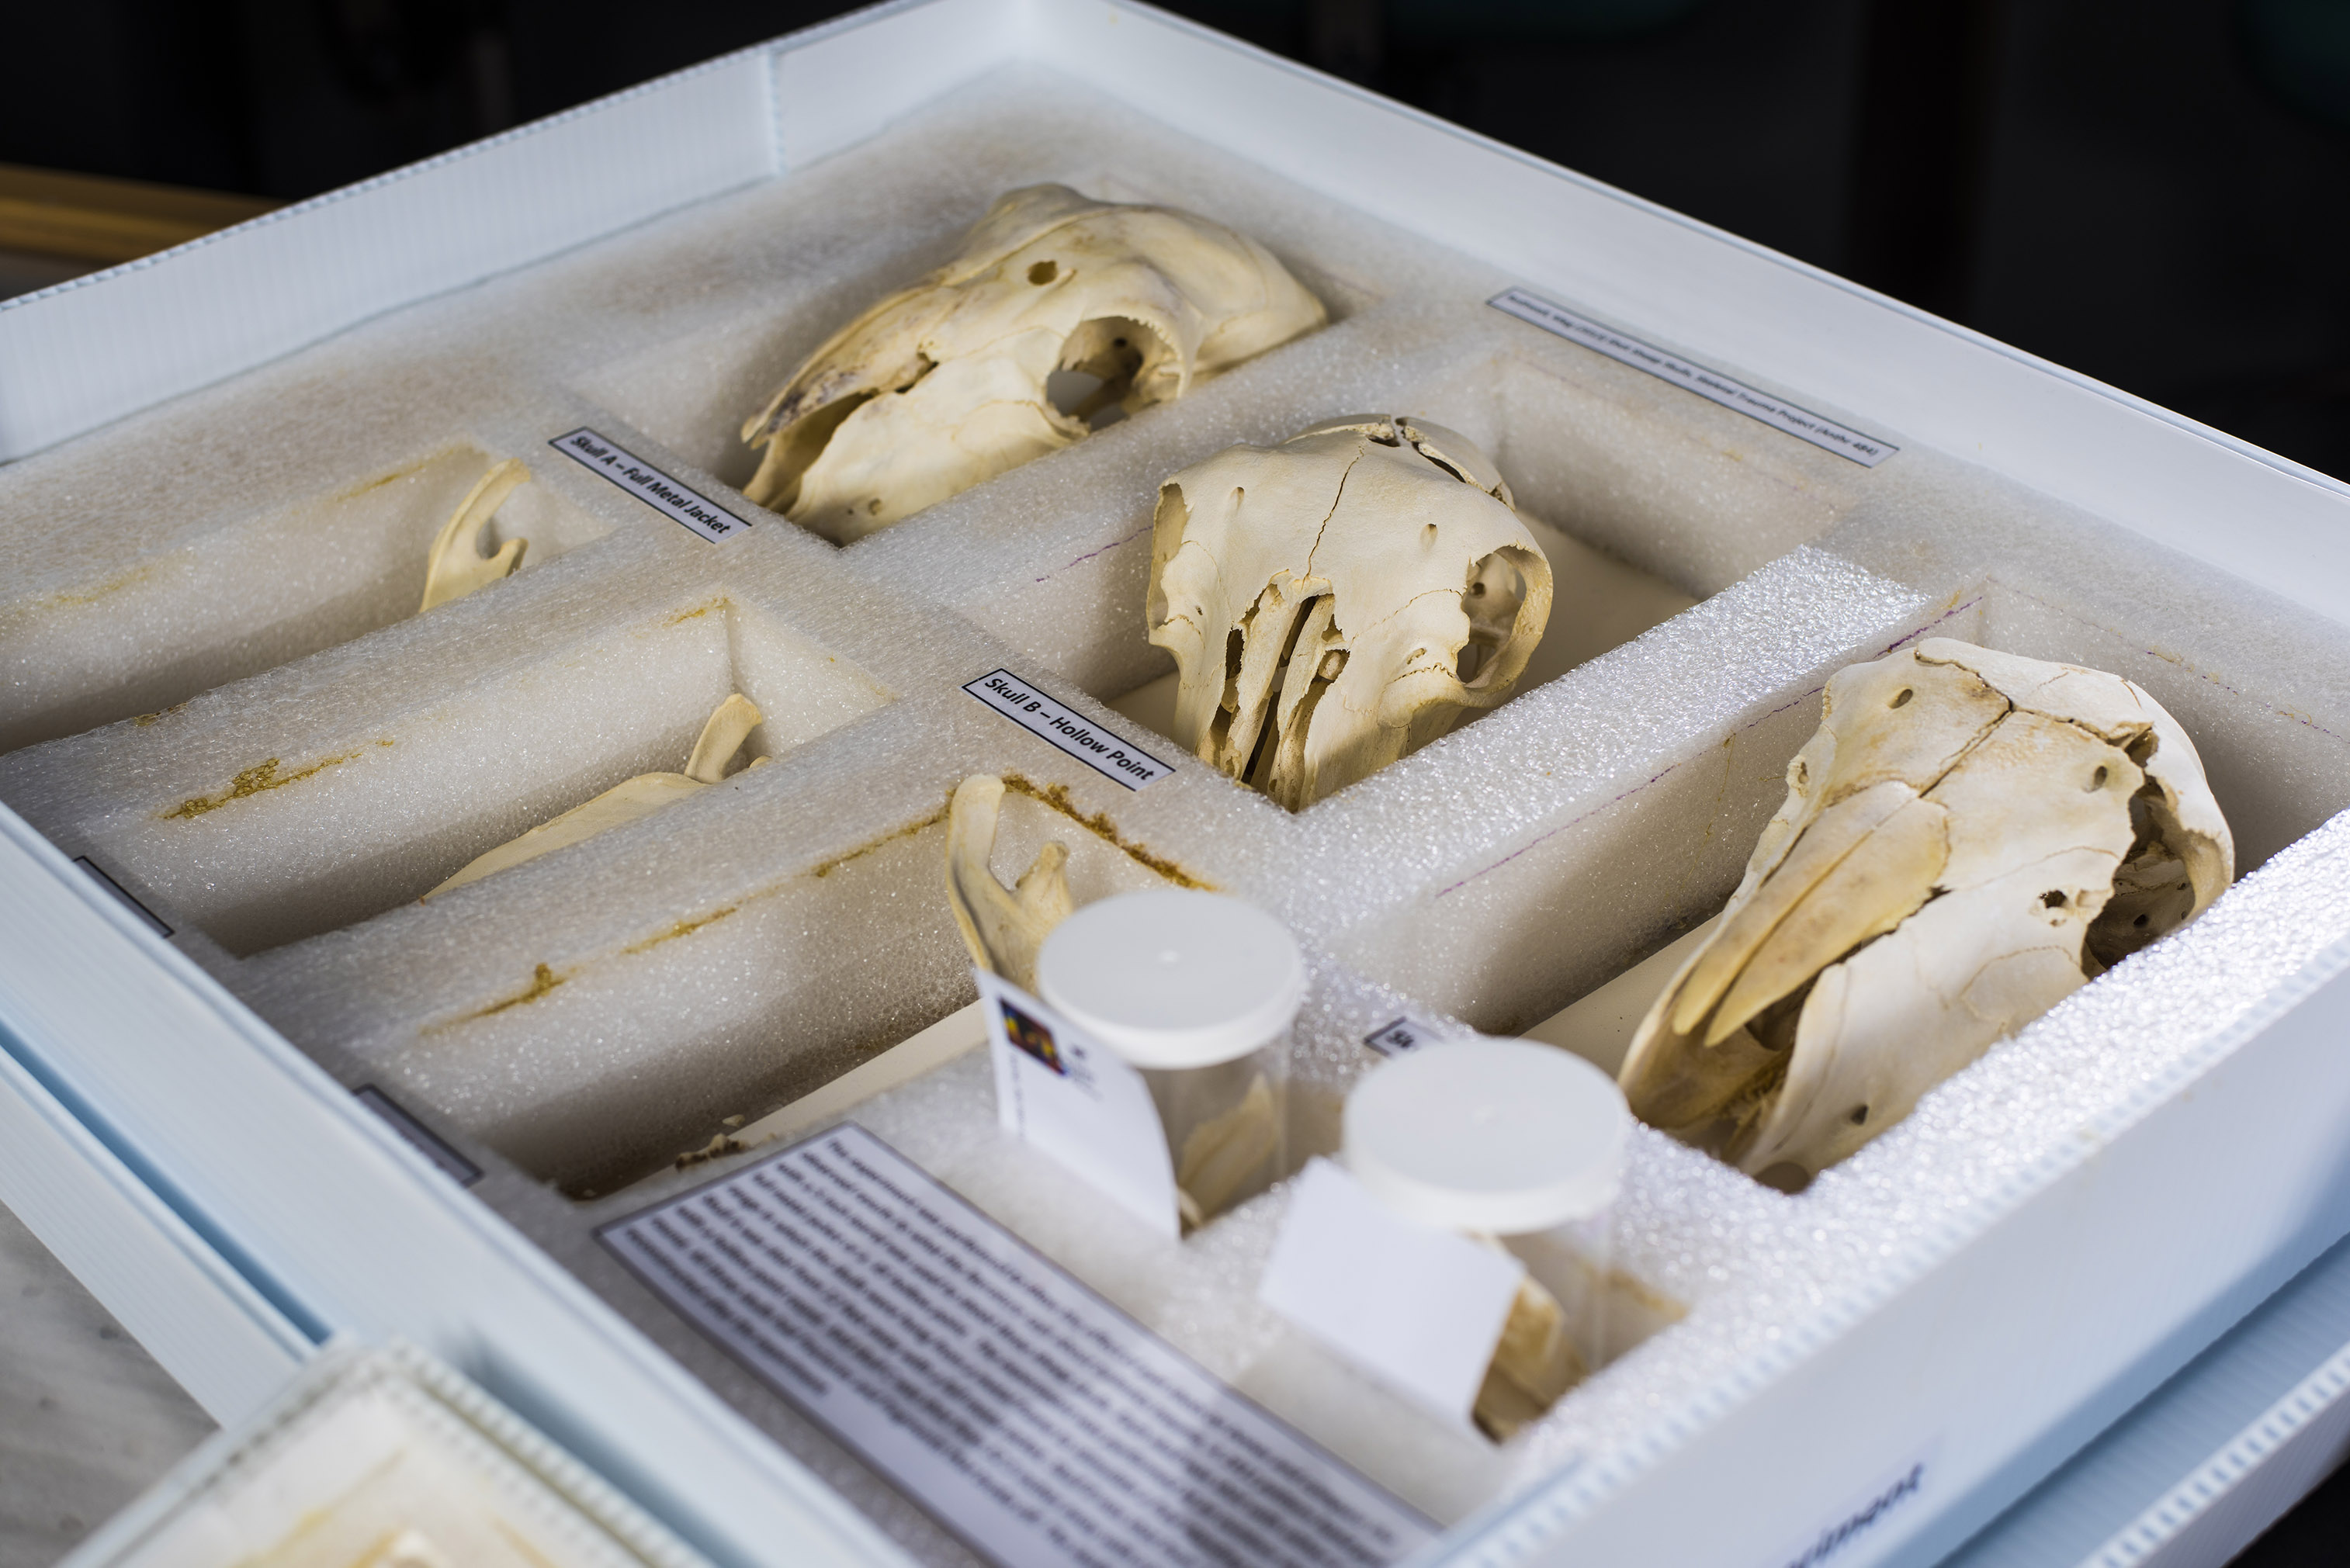 Three small animal skulls and smaller bones are individually separated by pieces of foam in a box.